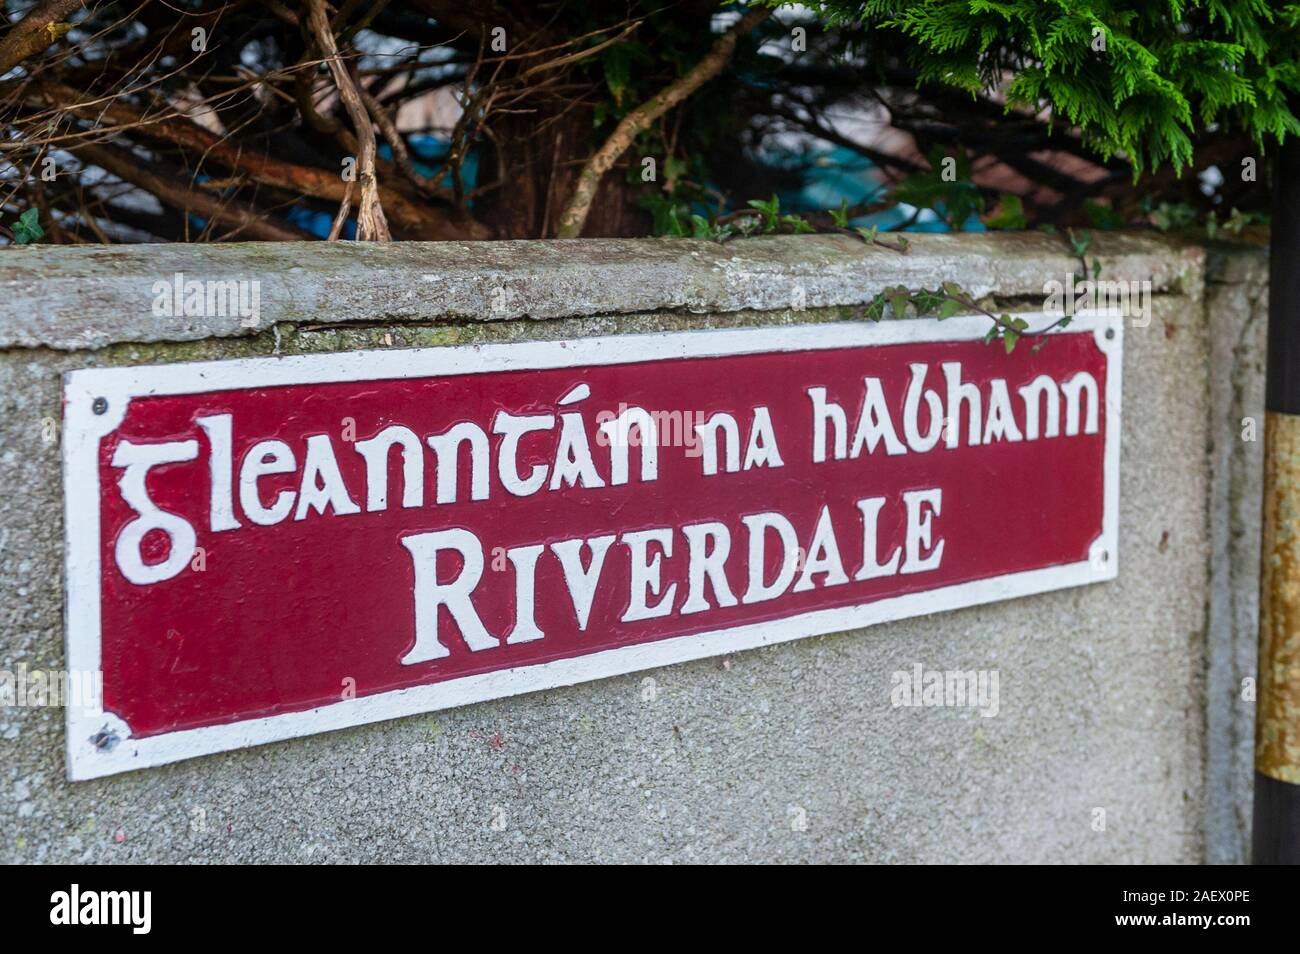 Skibbereen, West Cork, Ireland. 11th Dec, 2019. A 39 year old man was stabbed at 8.15pm last night in Riverdale Estate, Skibbereen. A group of youths allegedly comitted the crime. The man was taken to Cork Uiversity Hospital with non-life threatening injuries. Credit: AG News/Alamy Live News. Stock Photo